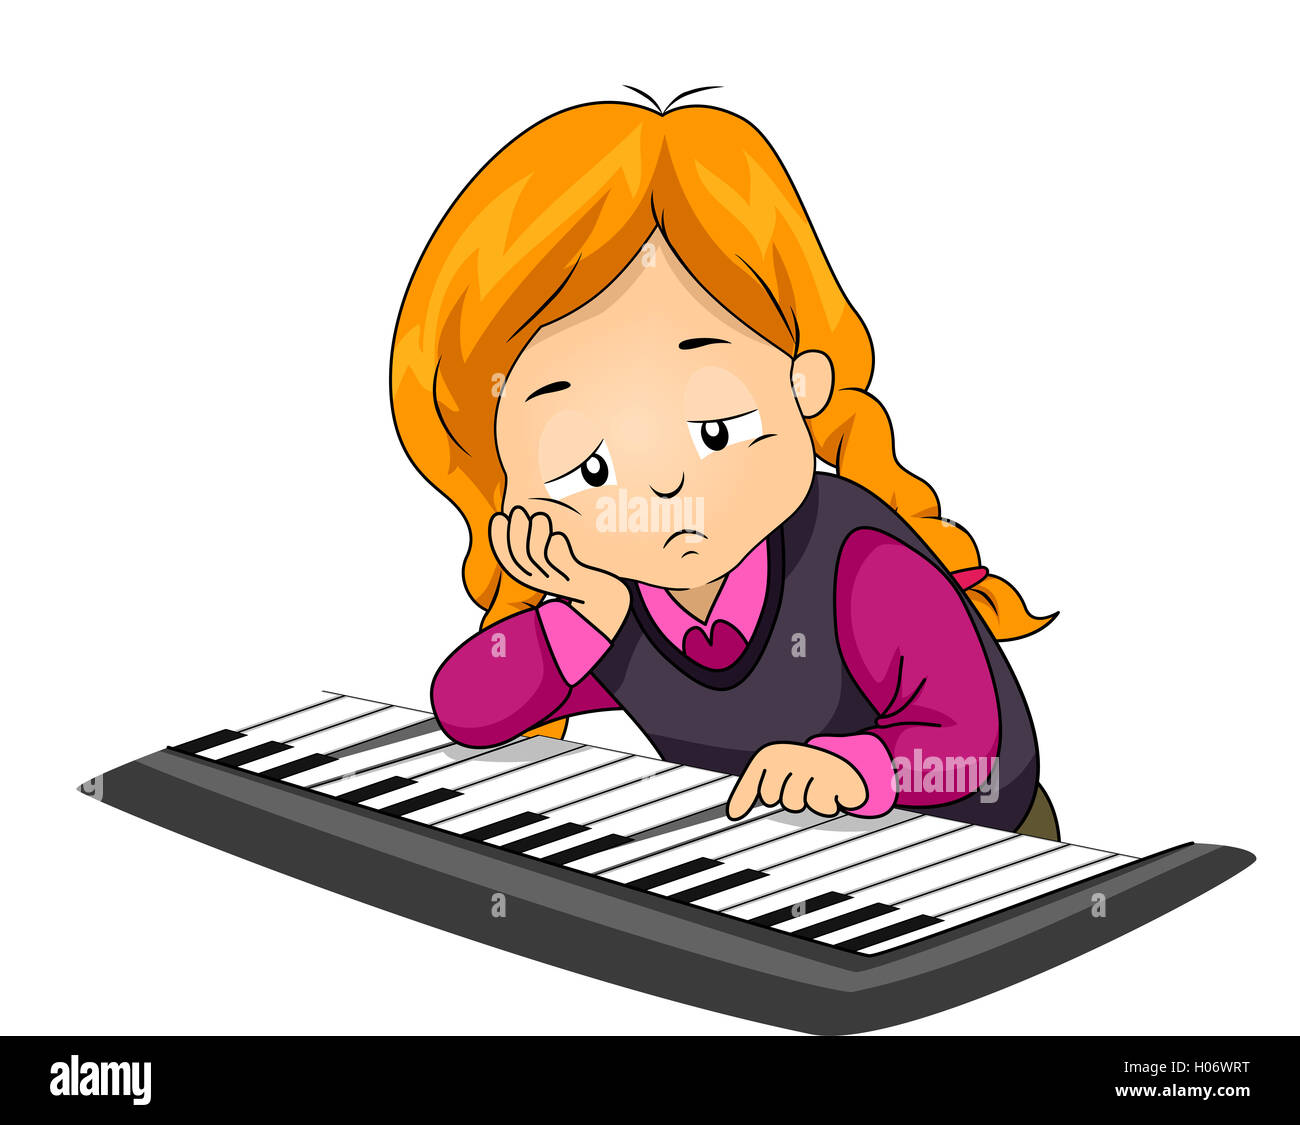 Illustration of a Bored Girl Playing with the Piano Stock Photo